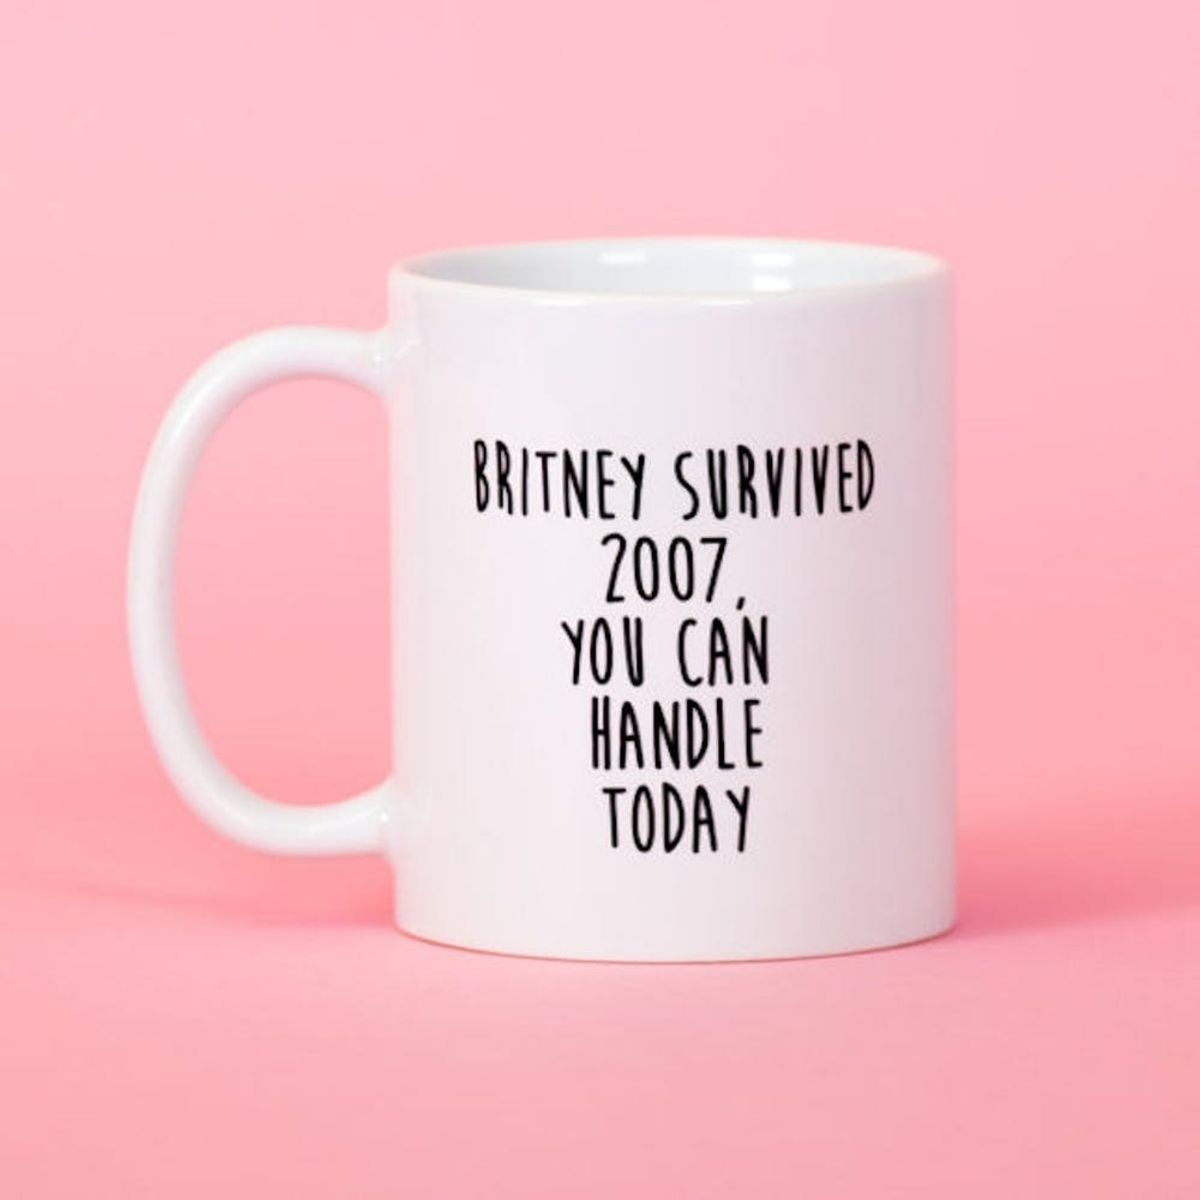 26 Must-Haves for Your Britney Lifetime Movie Premiere Party